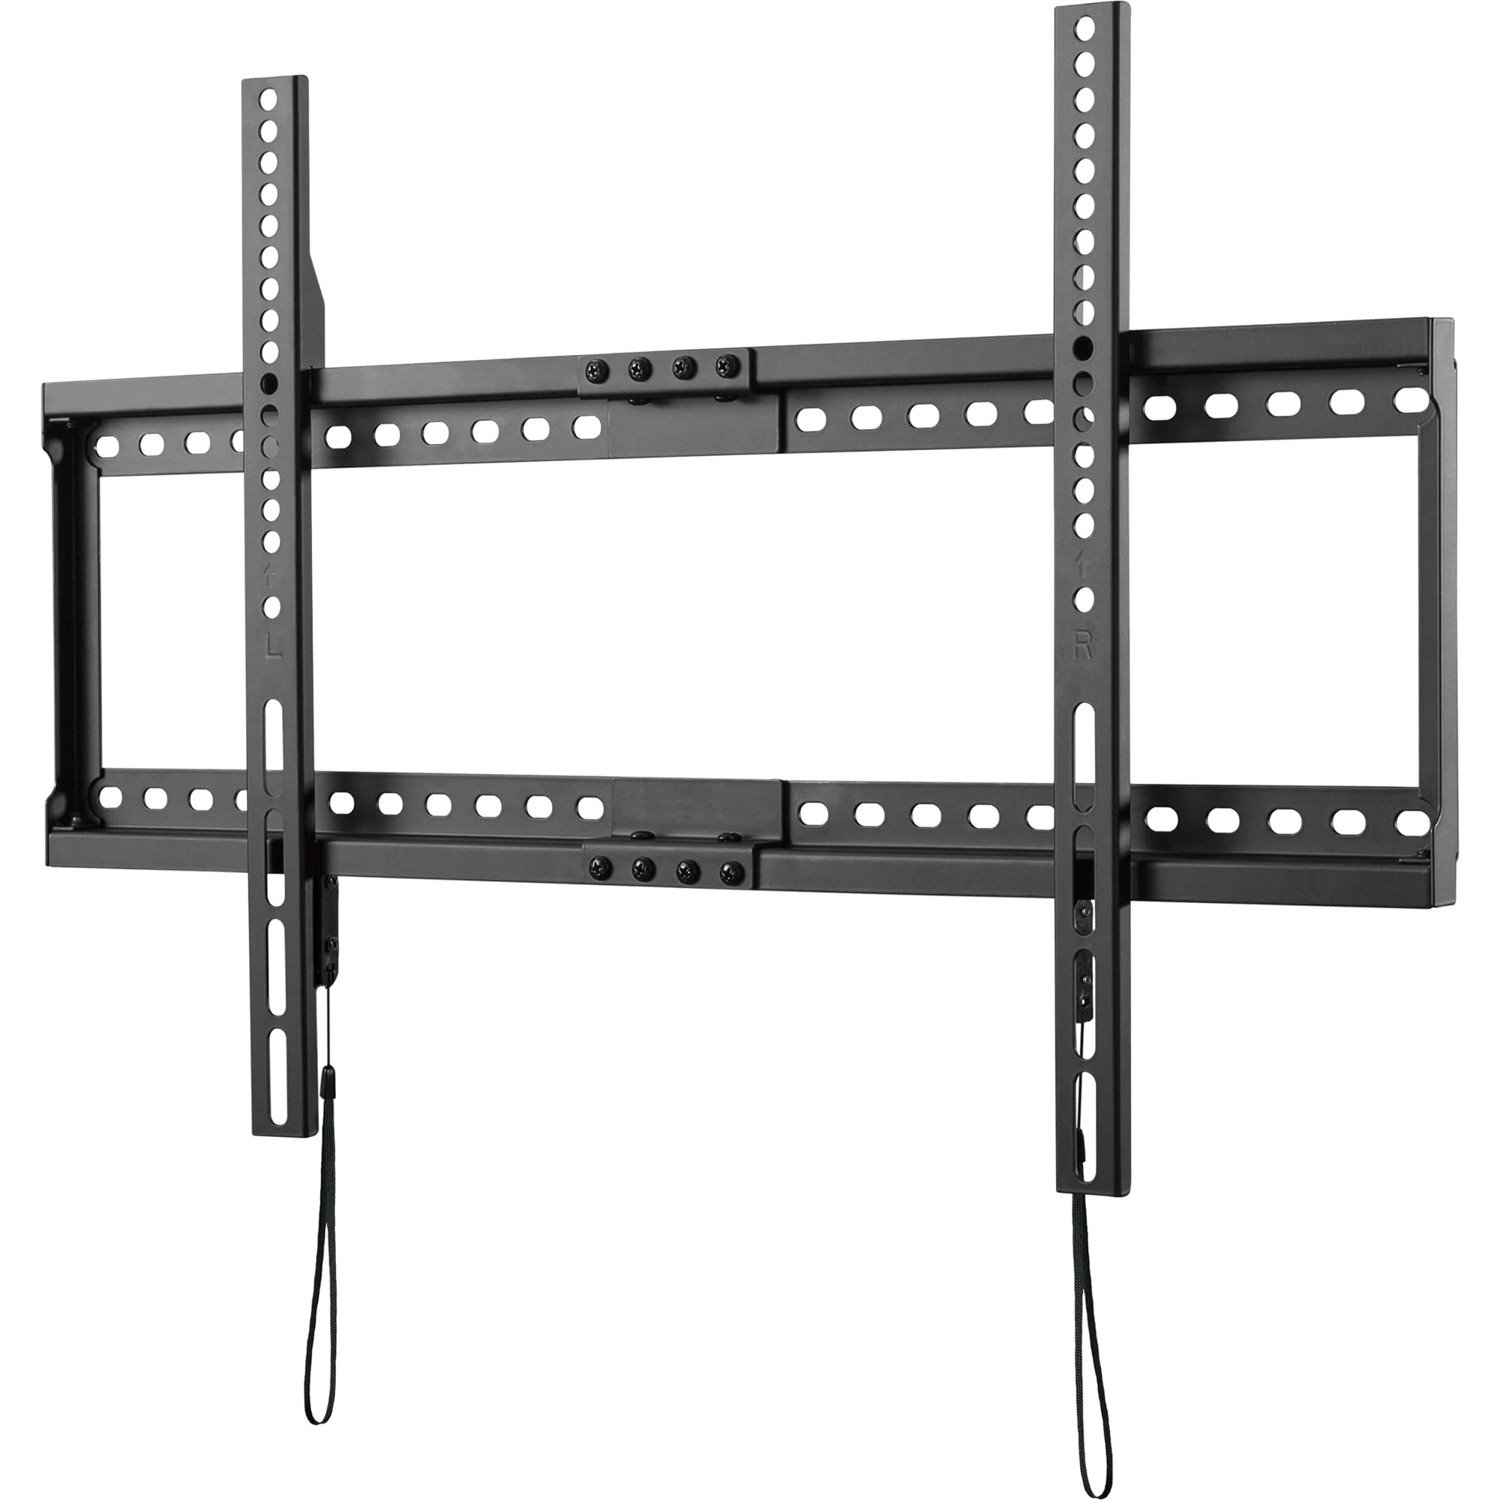 Tripp Lite by Eaton Fixed TV Wall Mount for 37" to 80" Displays - WallMount for TV, Curved Screen Display, Flat Panel Display, Monitor, Home Theater, HDTV - Black